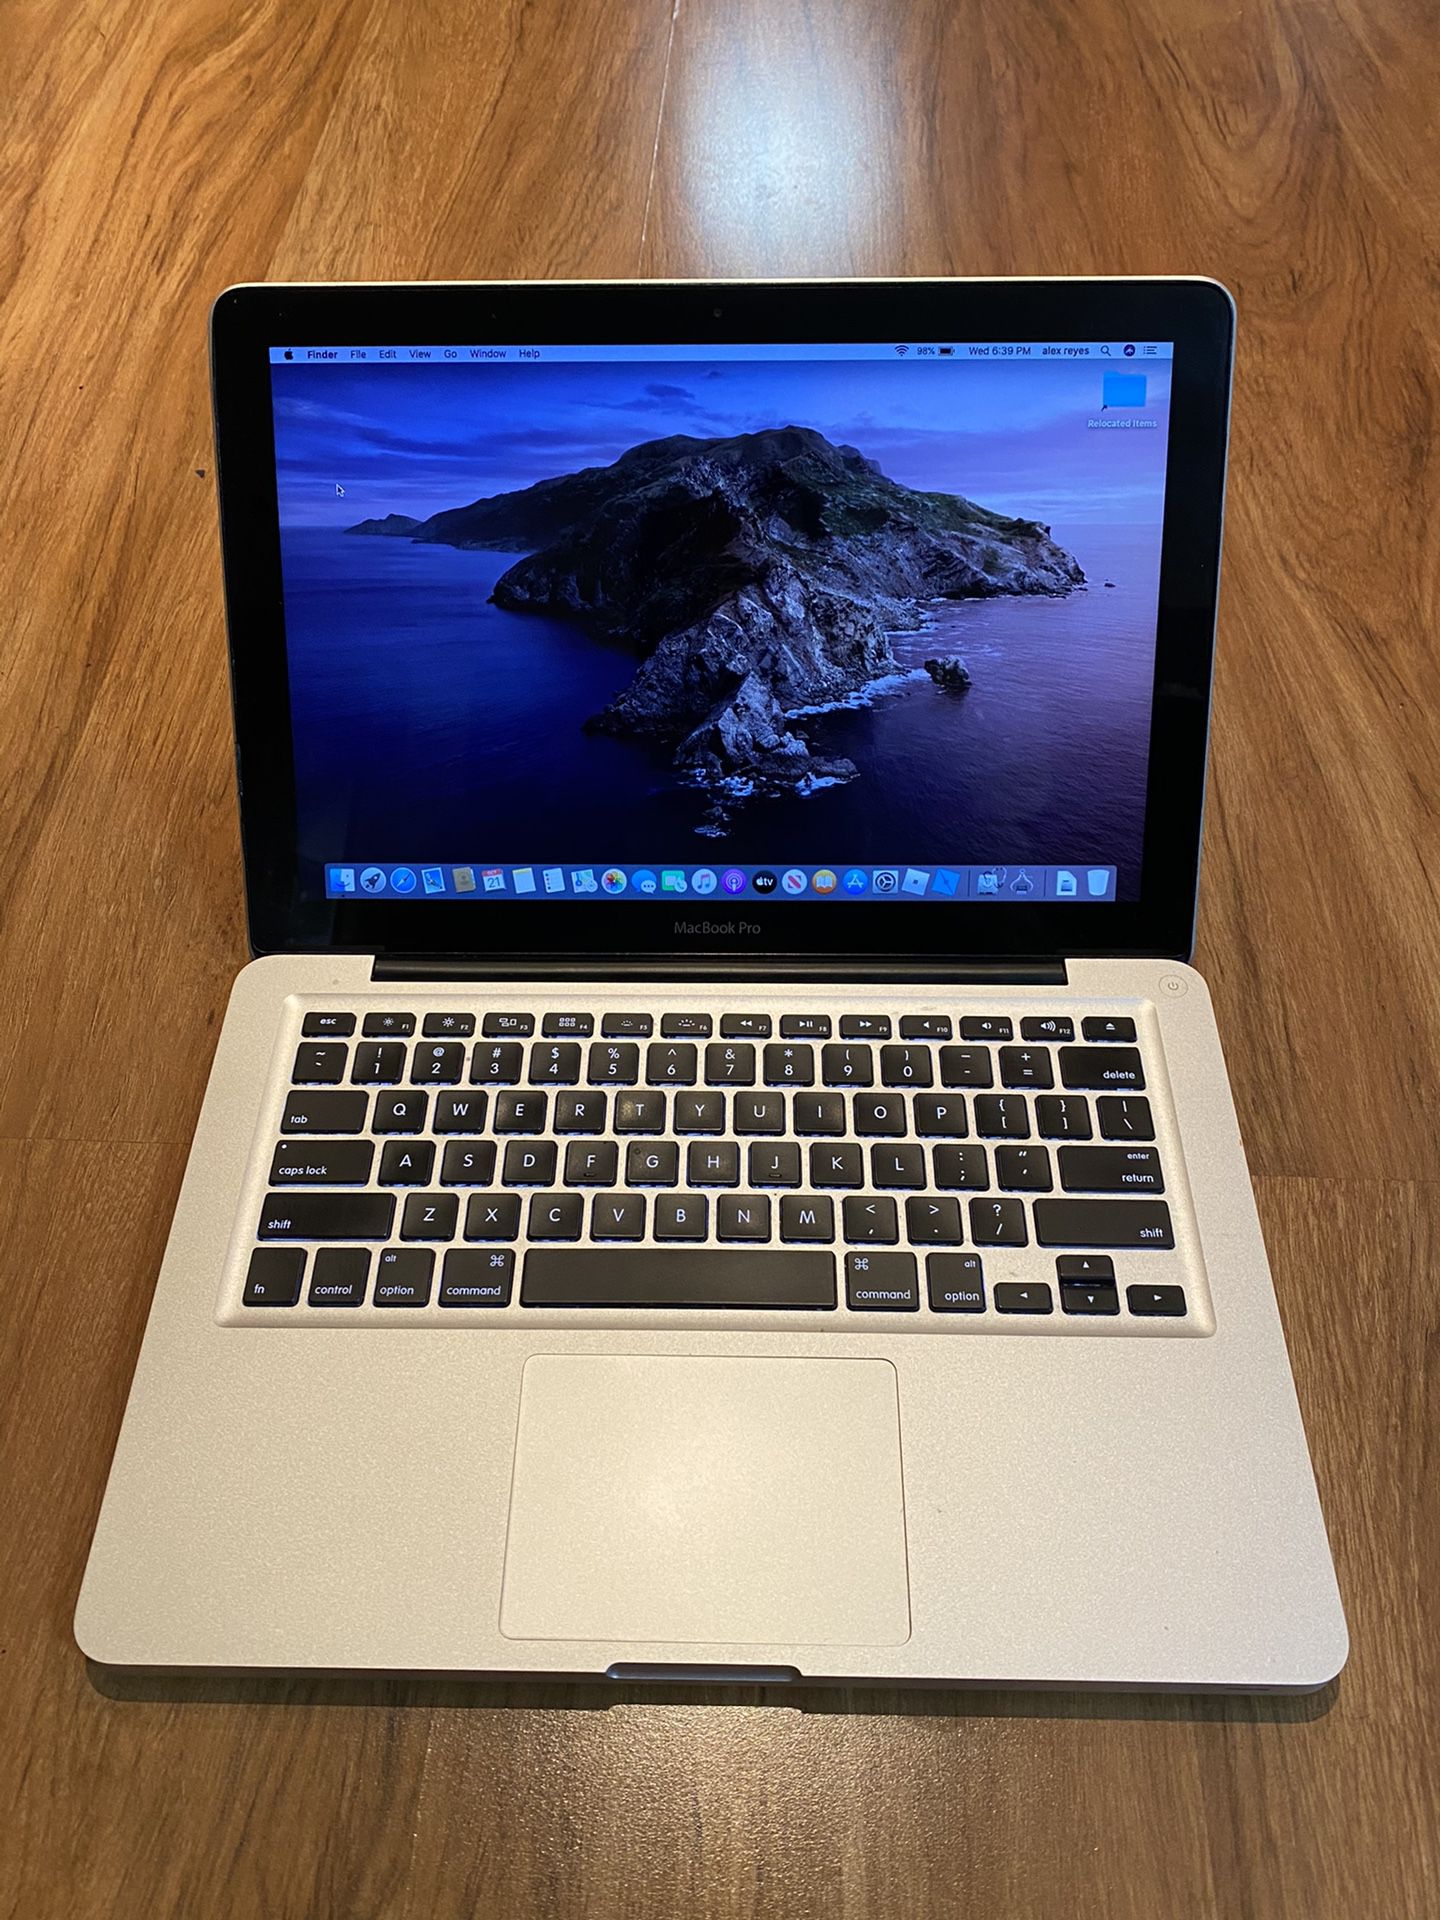 Macbook Pro core i5 OS Catalina 10.15.6 (13 inch-Mid 2012) 8GB Ram 500GB Hard Drive 13.3 inch HD Screen Laptop with charger in Excellent Working cond